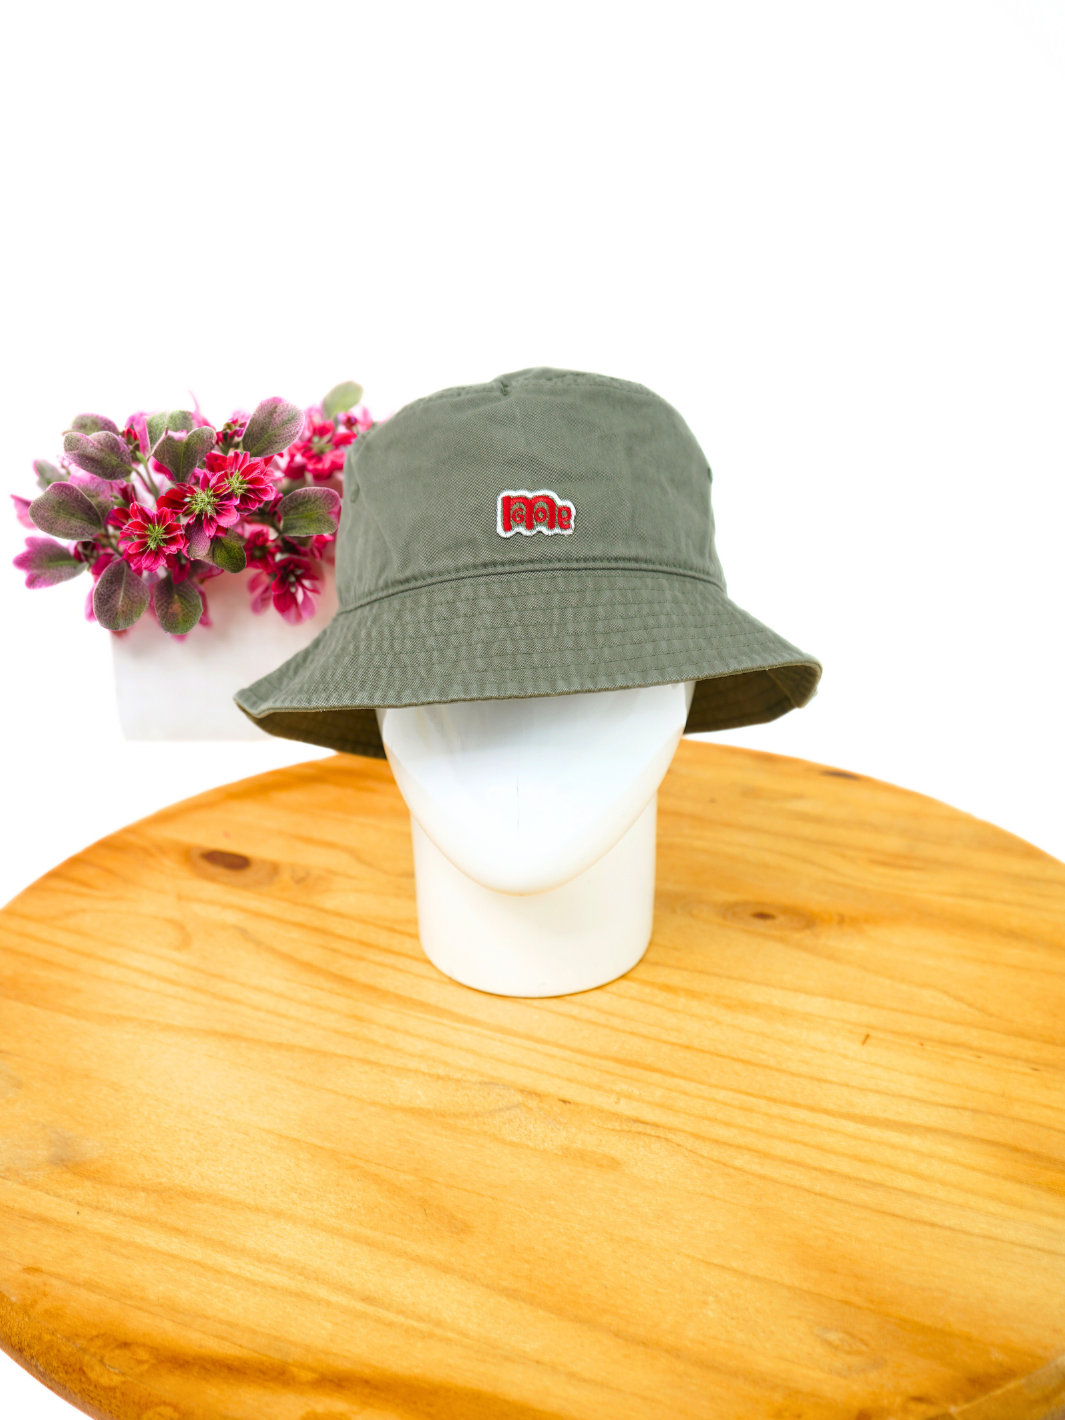 Represent your timeless style with this Olive Green GODinme Bucket Hat featuring GODinme brand name and logo embroidered in Red